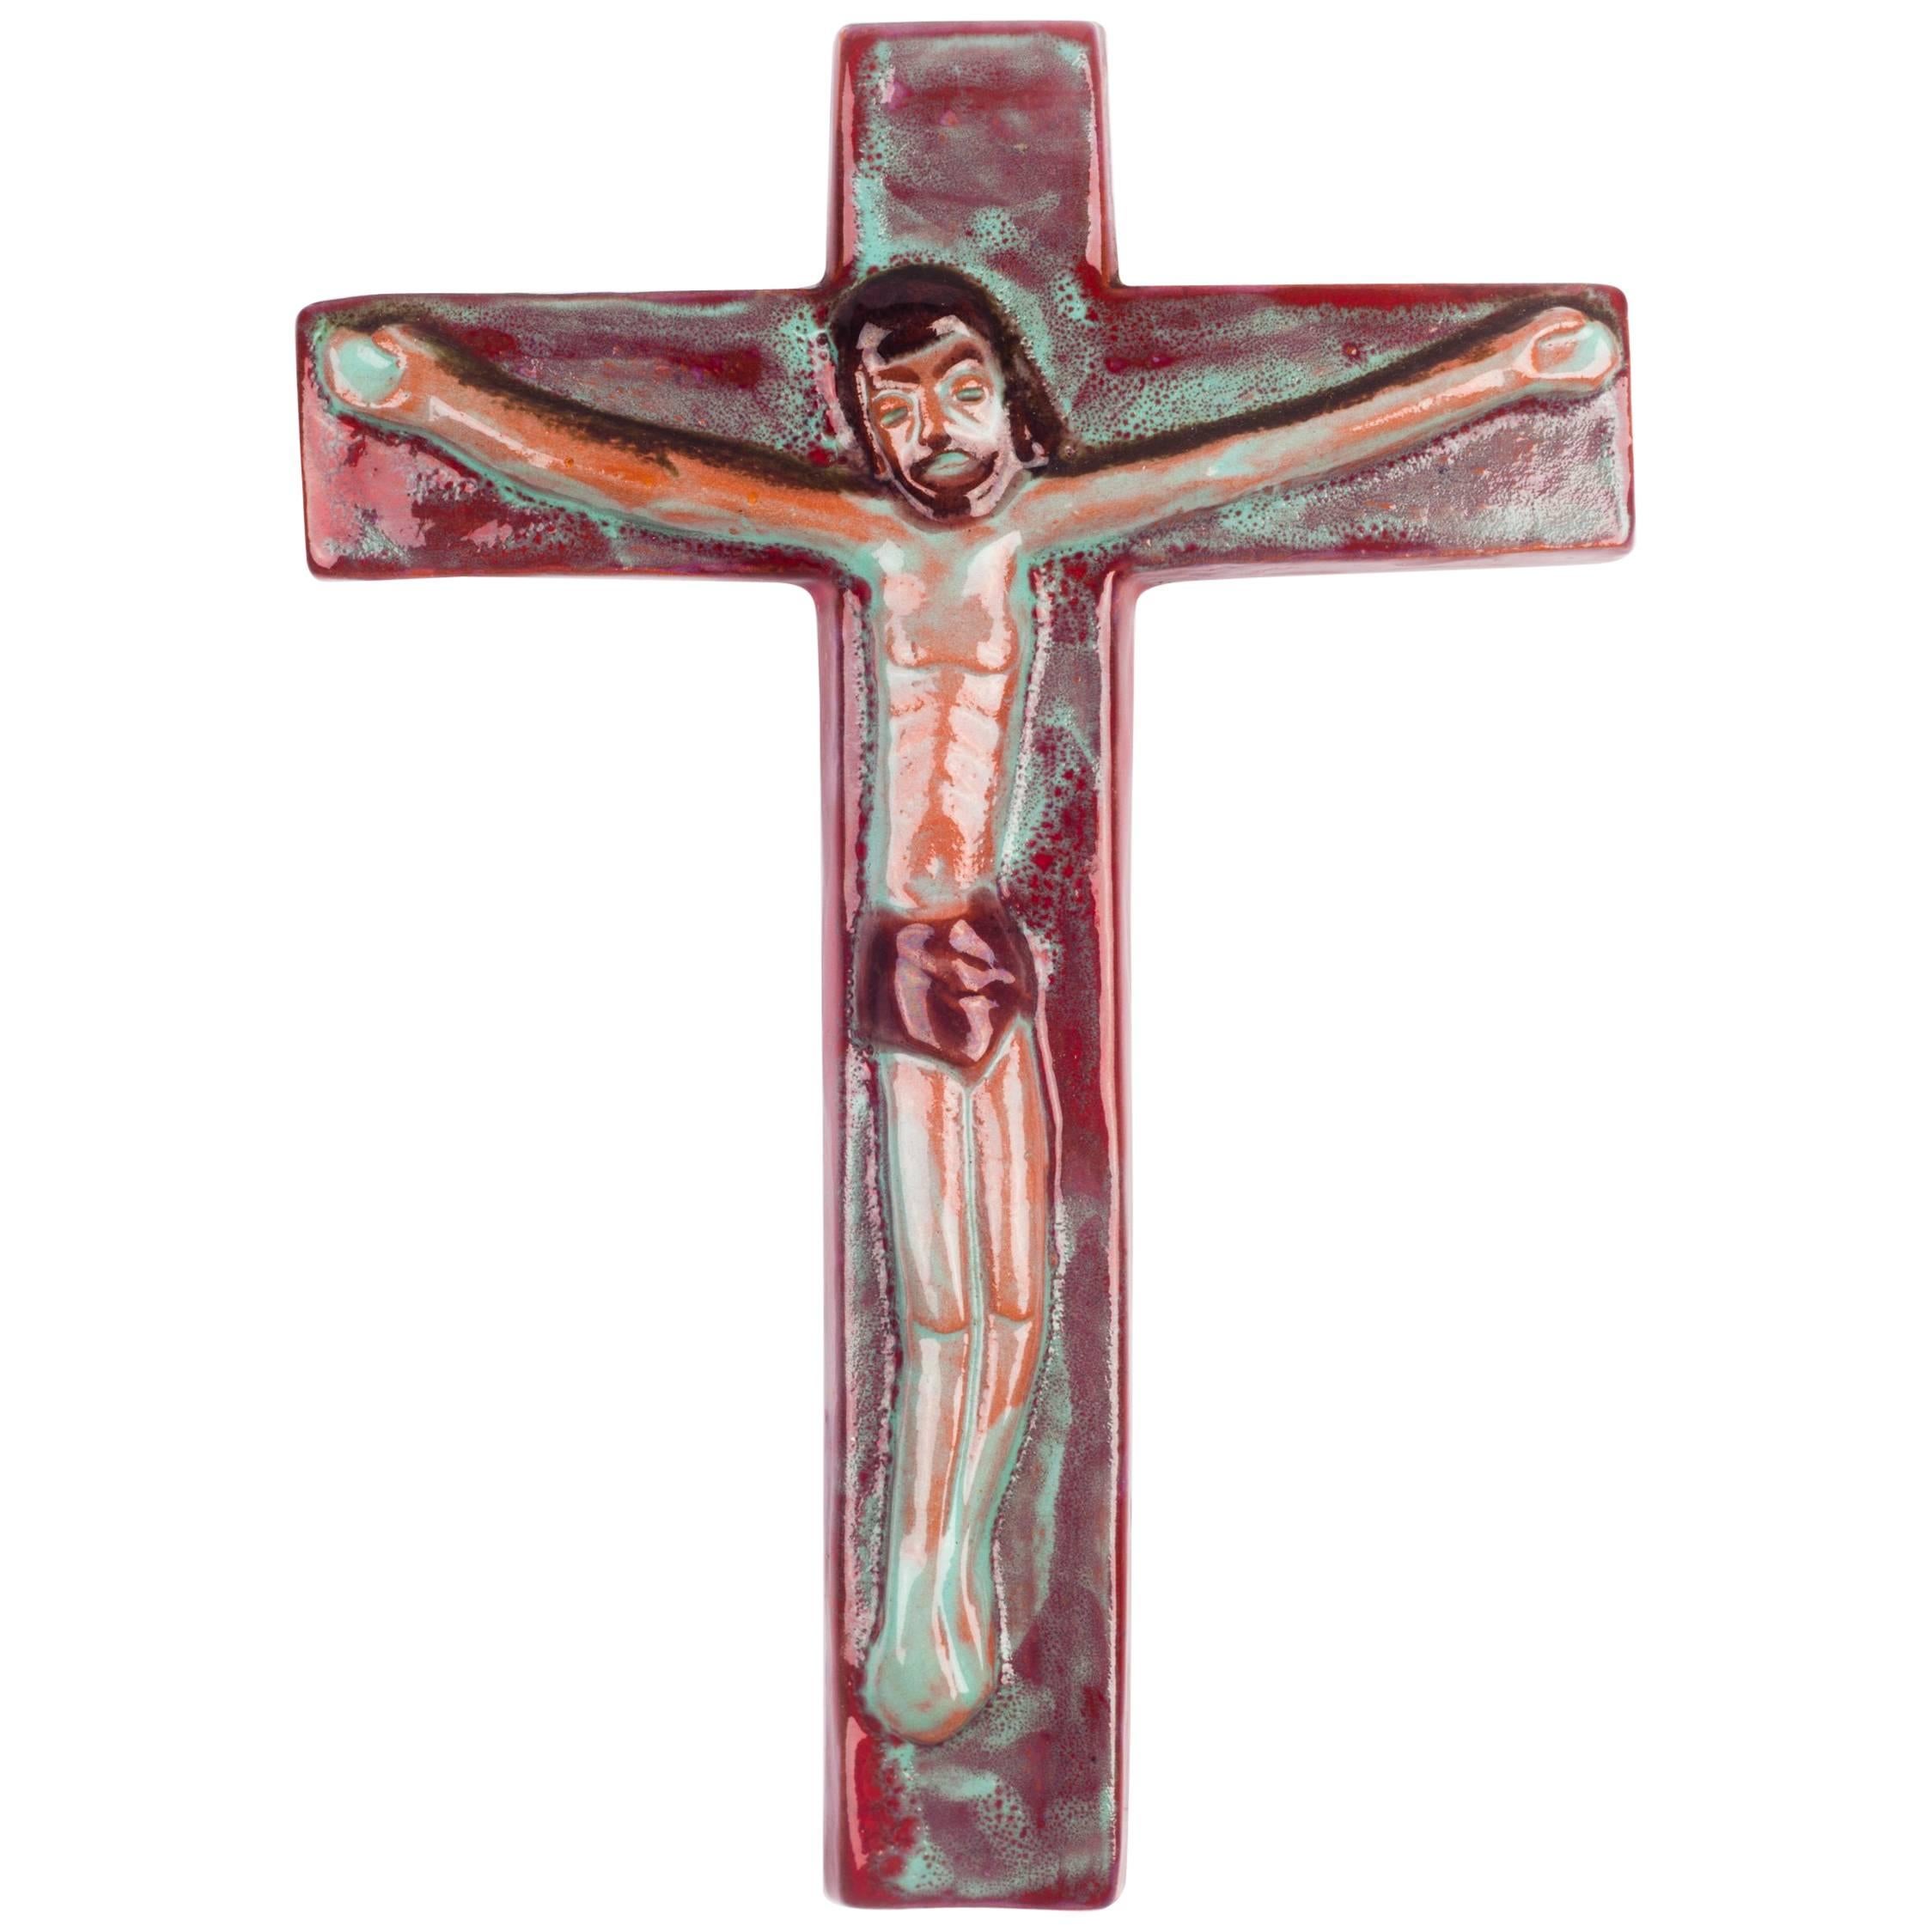 Wall Crucifix in Ceramic, Hand-Painted, Burgundy, Teal, Made in Belgium, 1960s